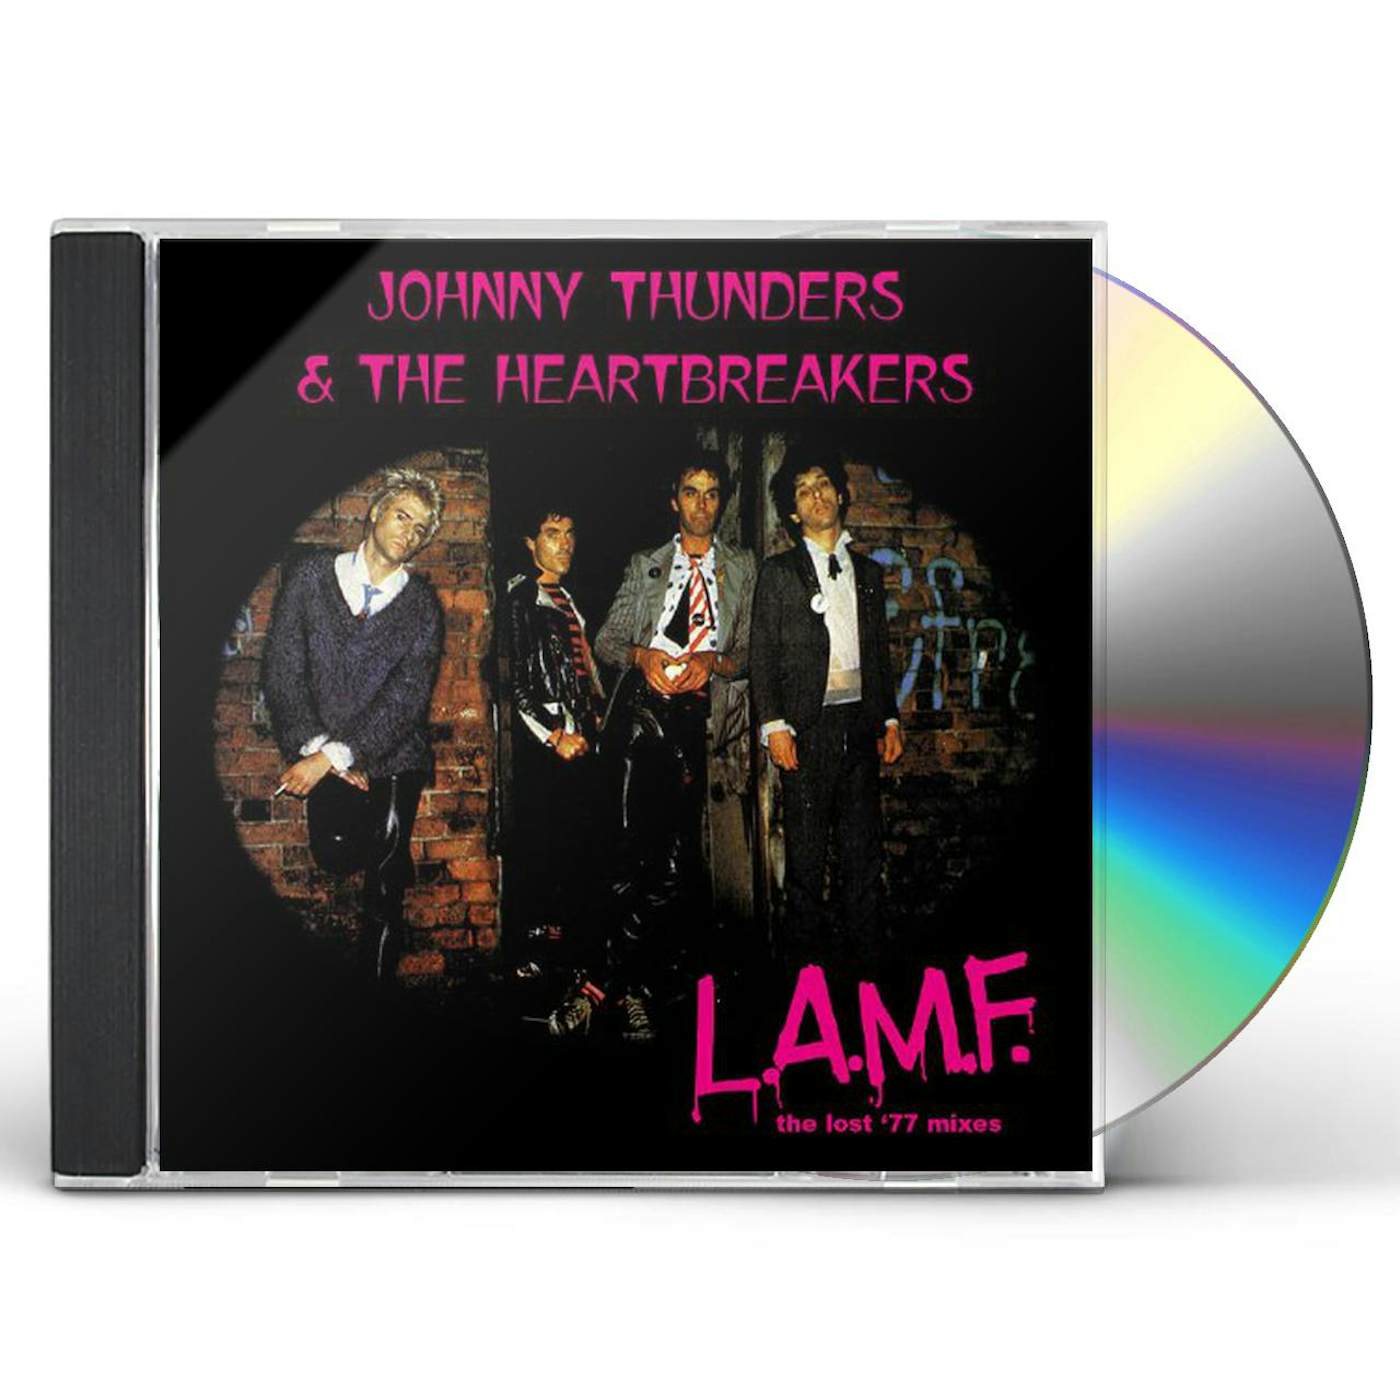 Johnny Thunders & The Heartbreakers L.A.M.F.: THE LOST '77 MIXES' (REMASTERED) CD